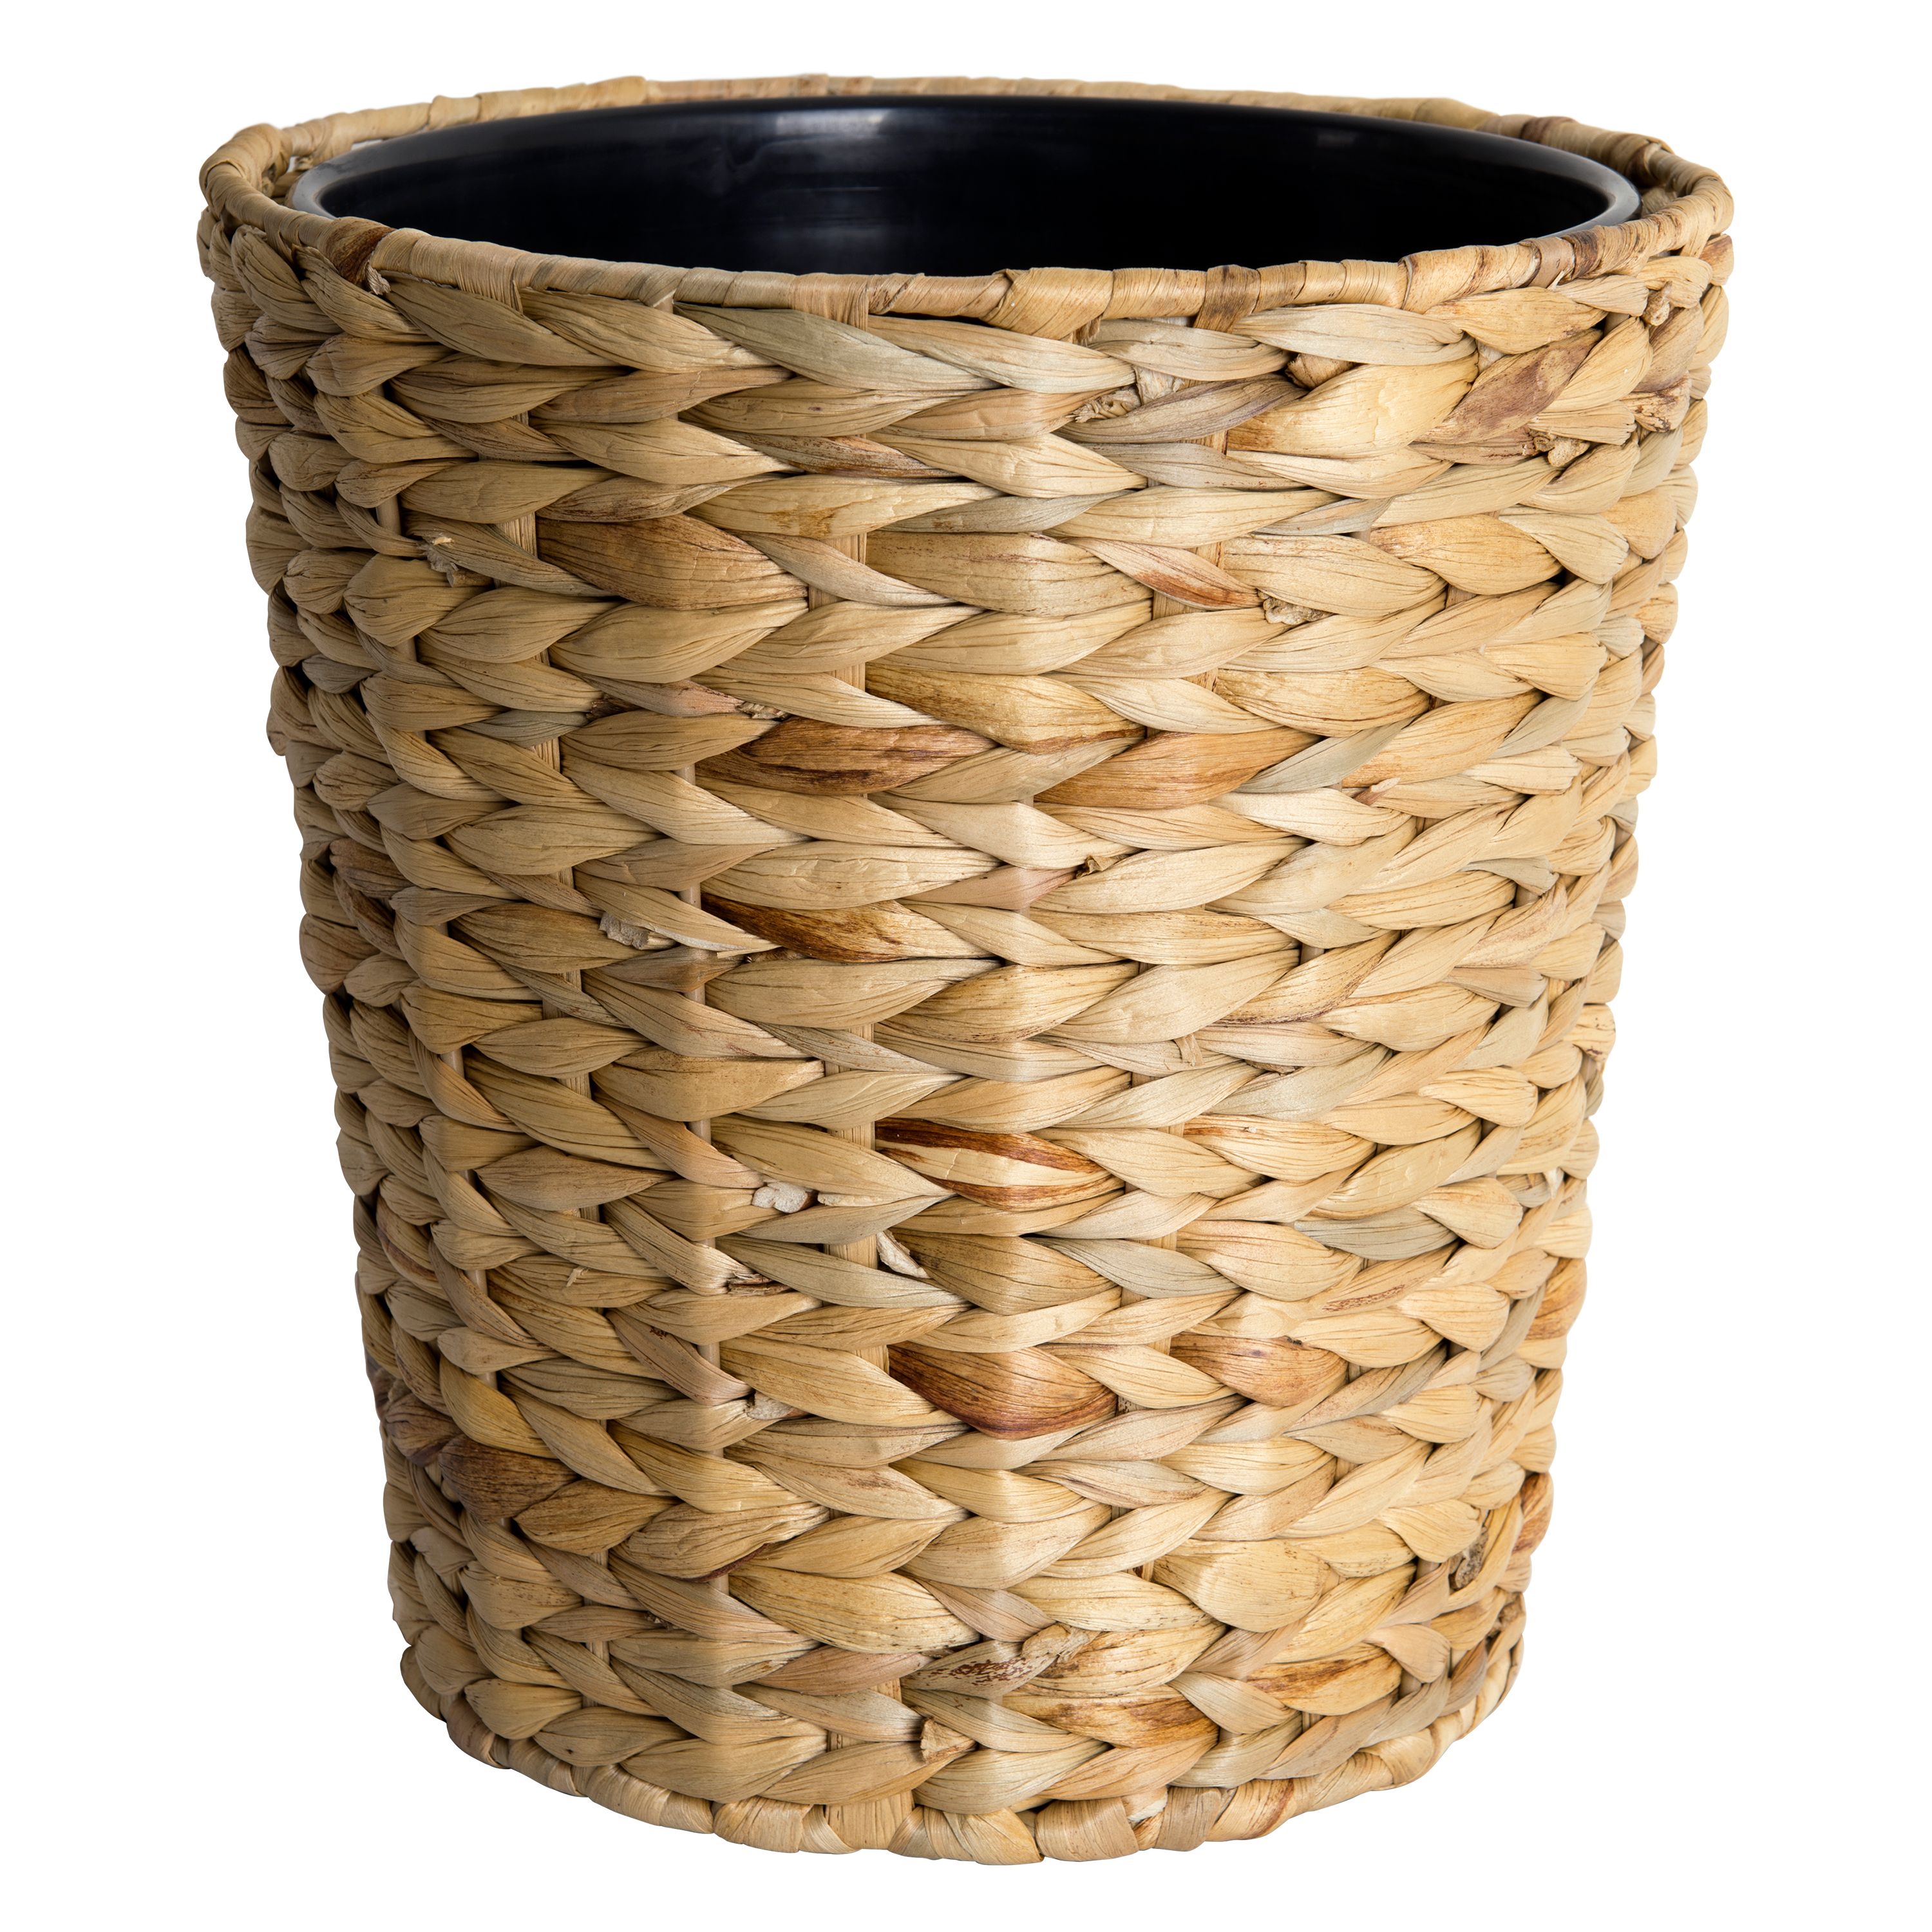 Better Home & Gardens Water Hyacinth 1.8 Gallon Wastebasket with Removable Liner, Natural - image 1 of 5